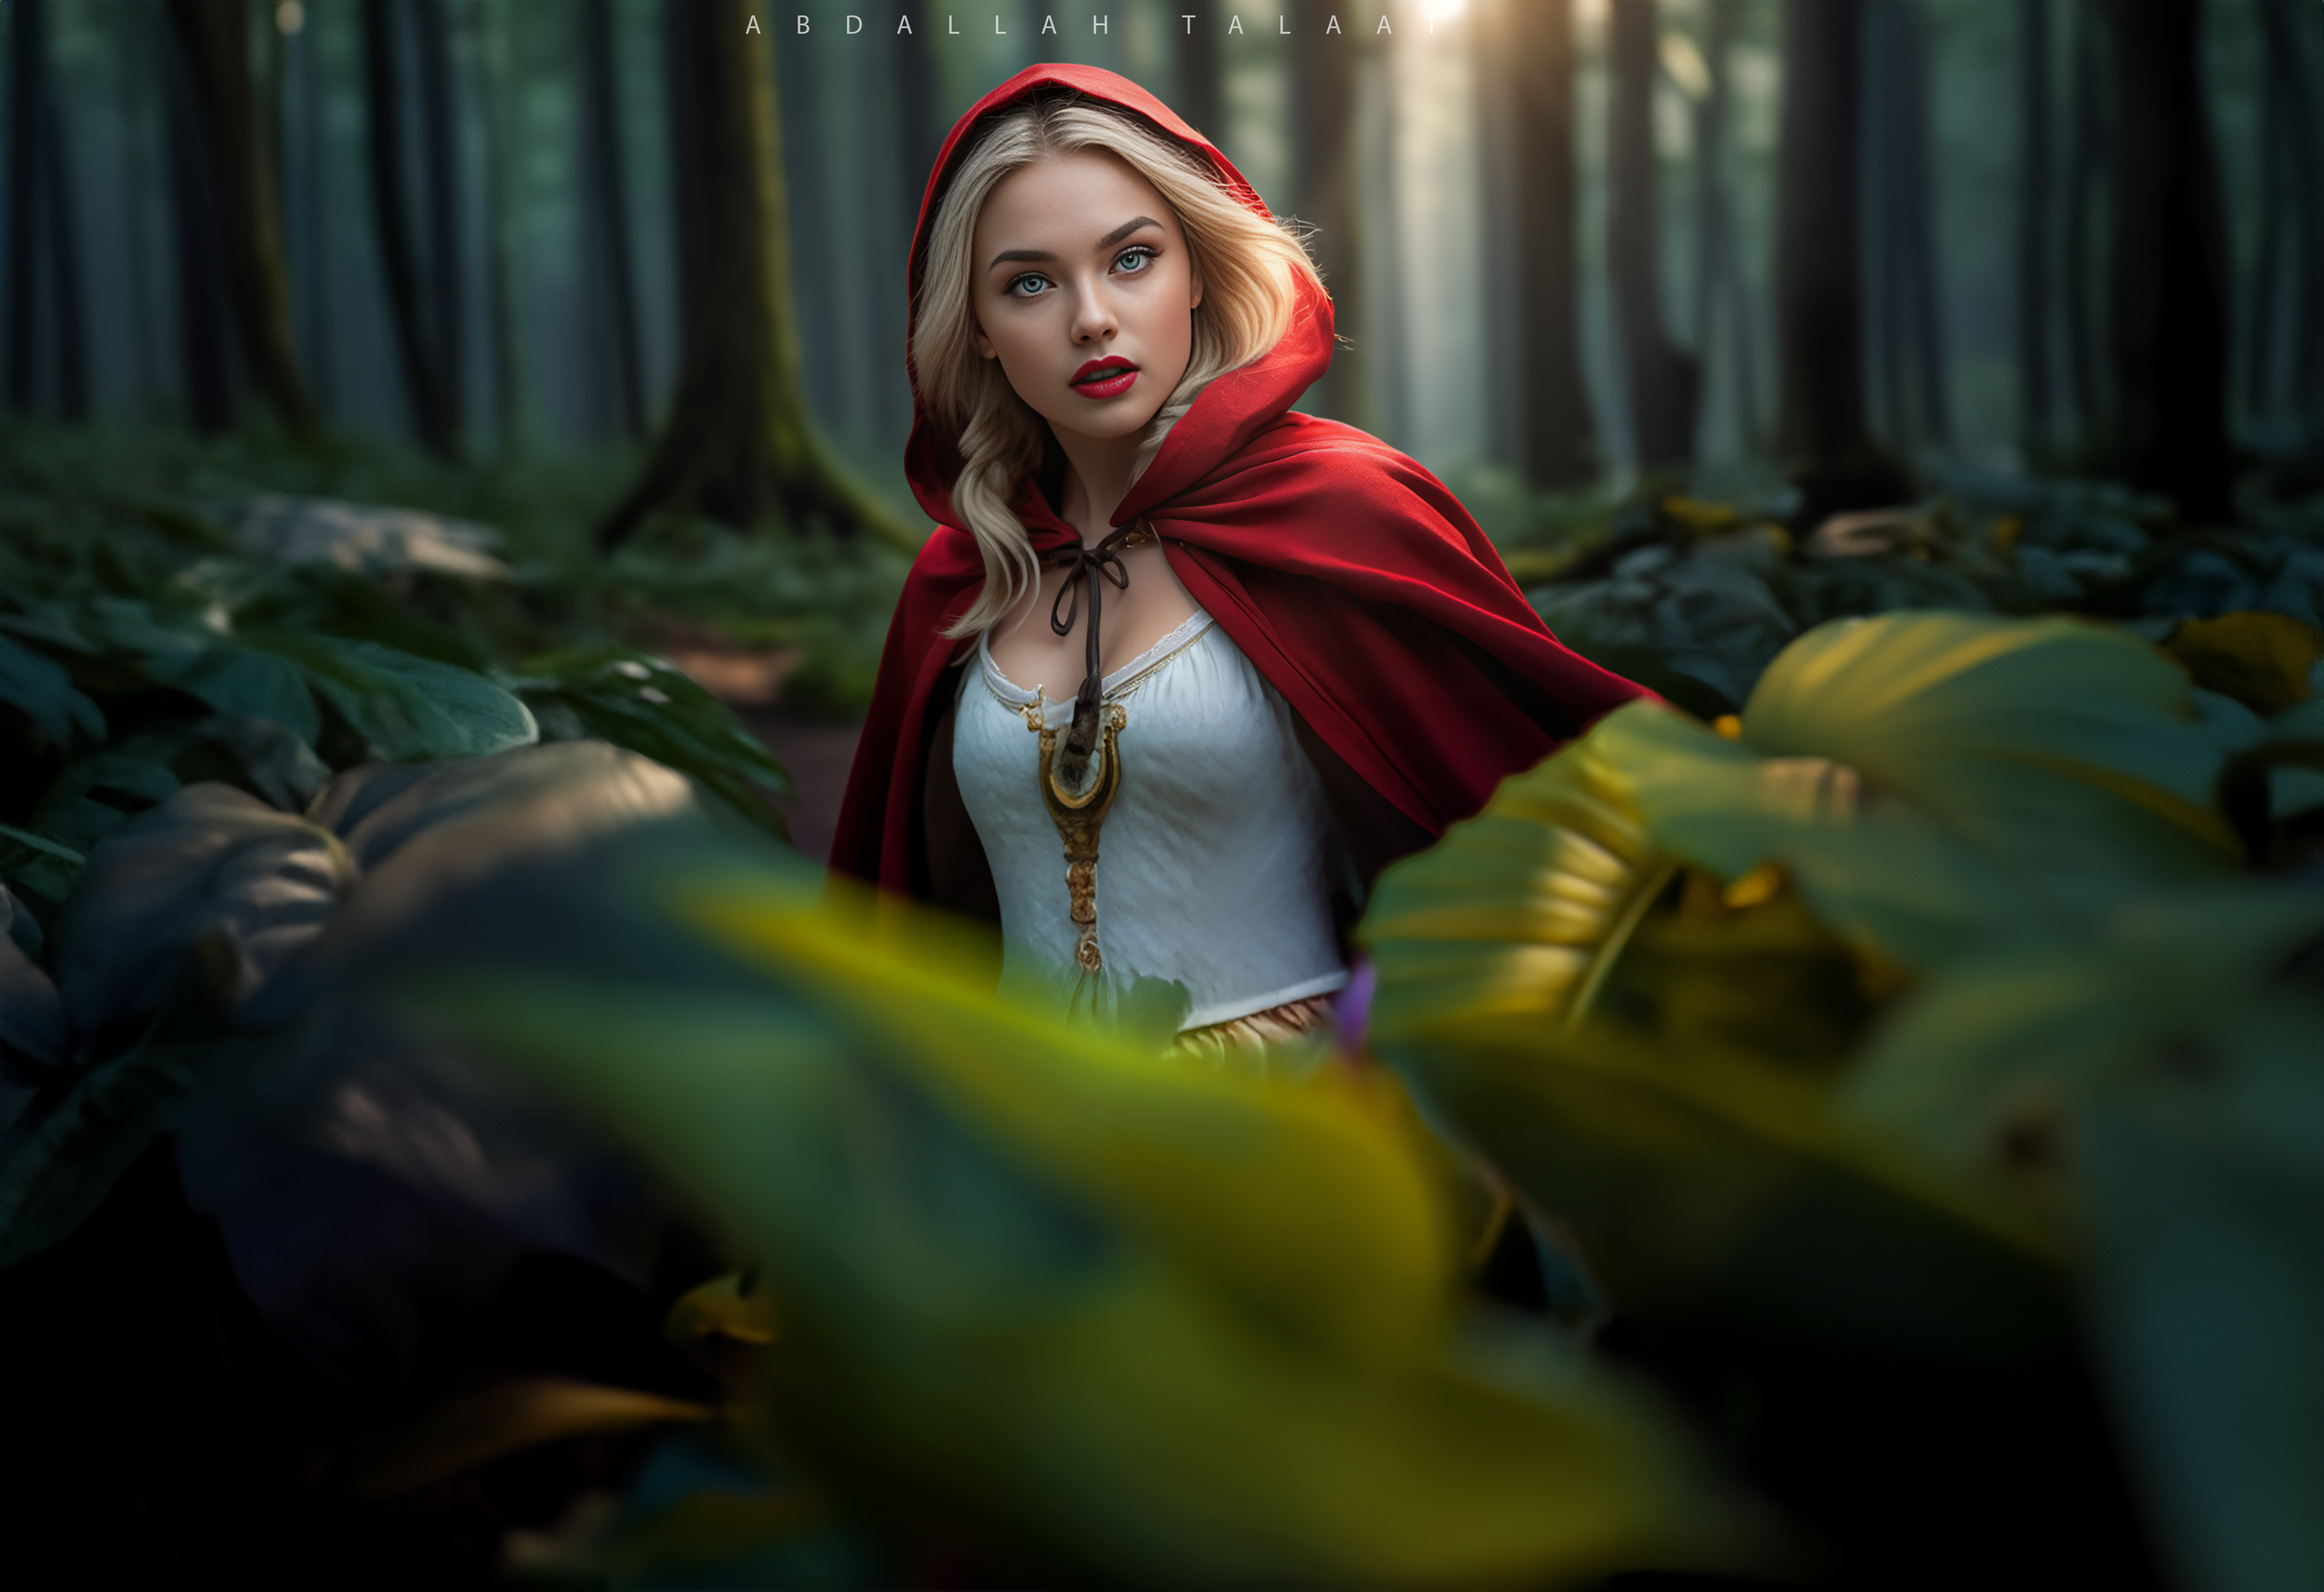 General 4681x3206 Little Red Riding Hood women red cape Abdallah Talaat AI art fantasy girl digital art outdoors women outdoors red lipstick lipstick parted lips blue eyes looking at viewer blonde trees teeth nature leaves